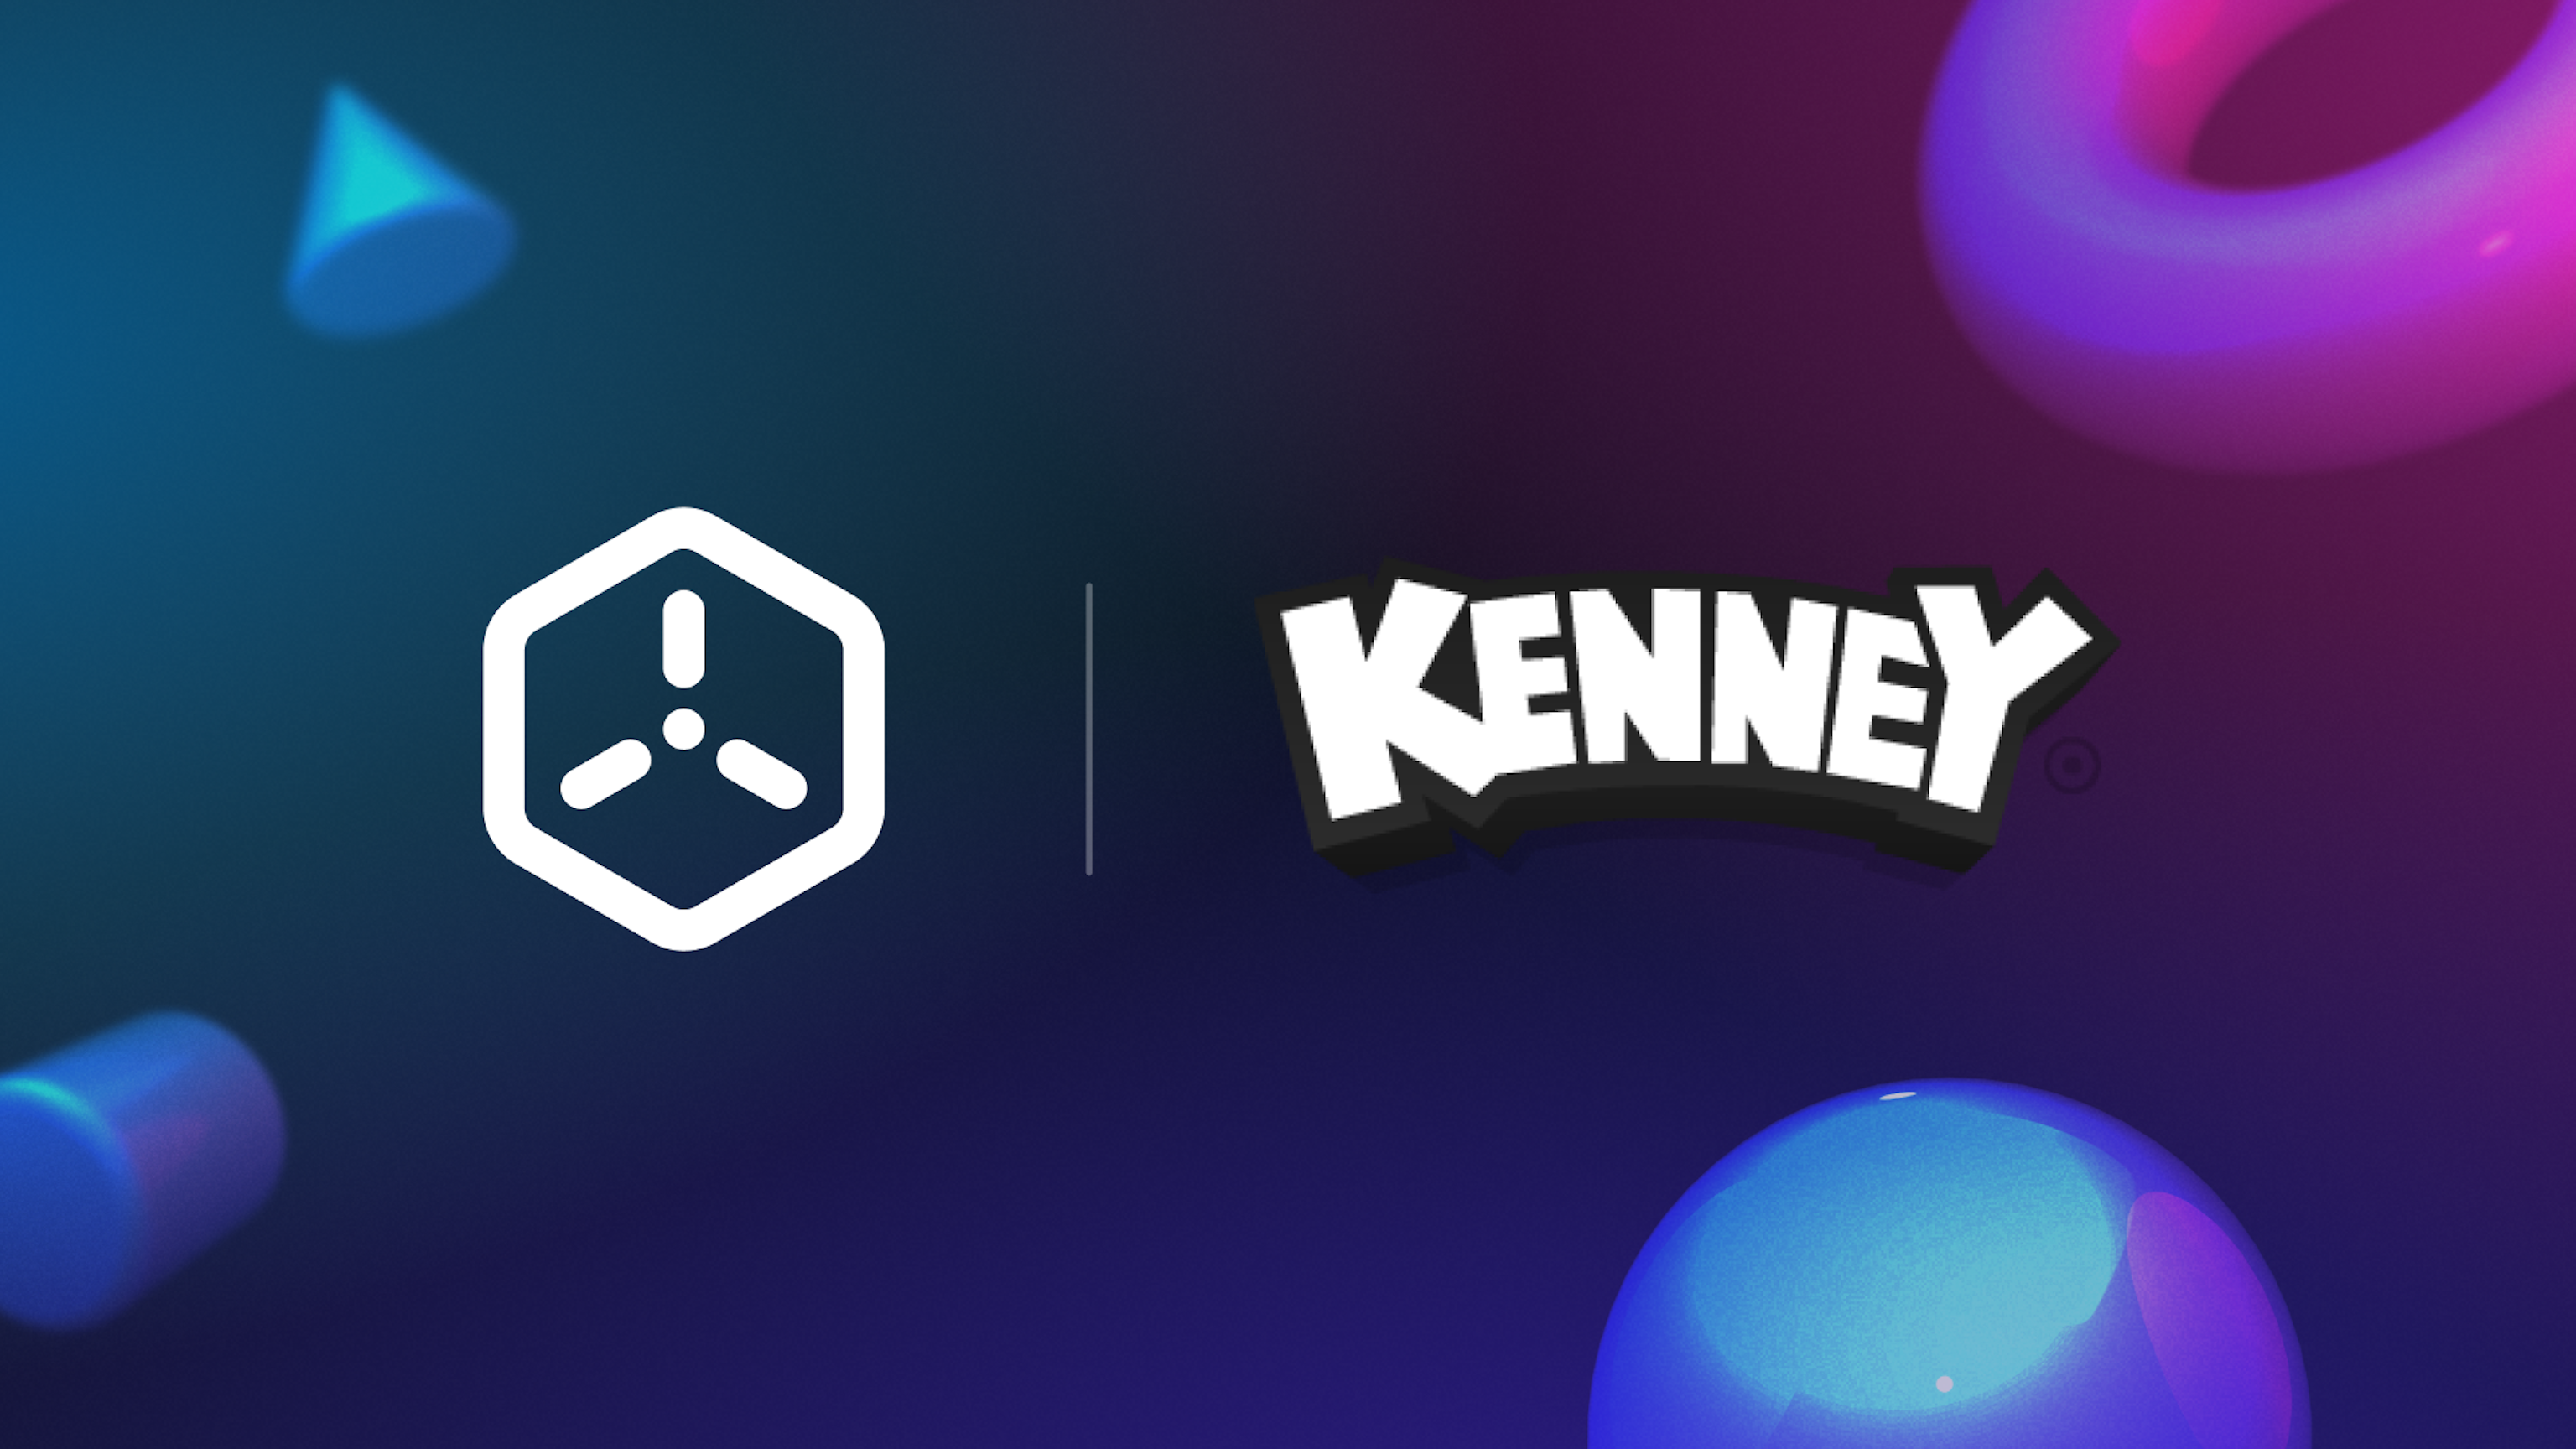 Kenney: A Treasure Trove for Game Developers and Design